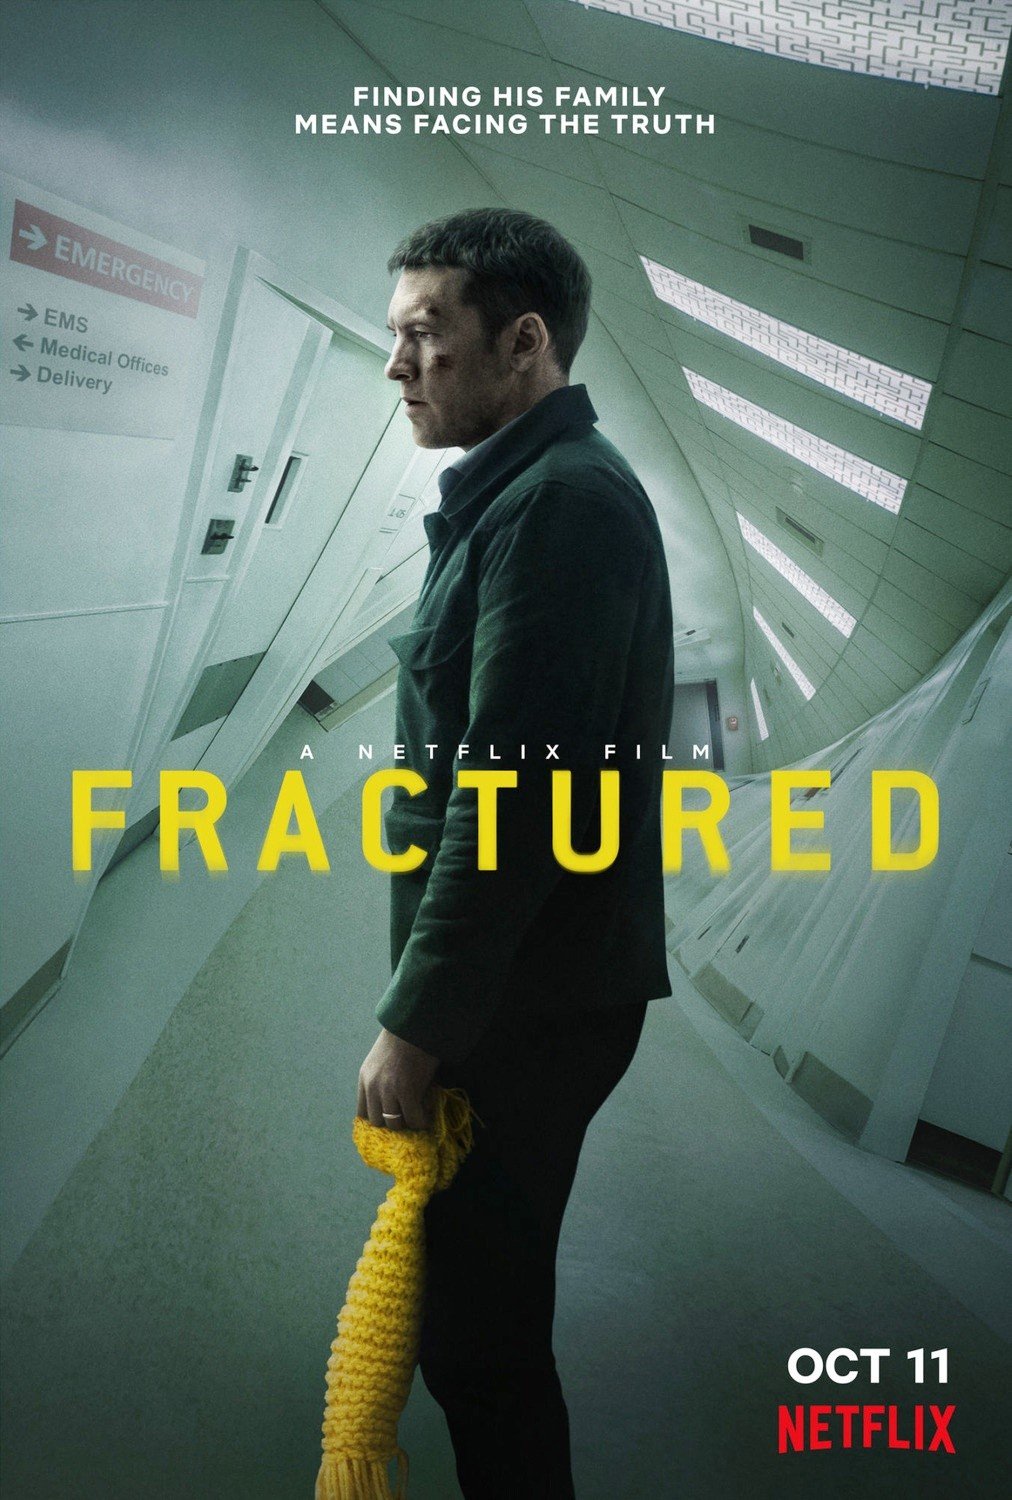 Poster of Netflix's Fractured (2019)